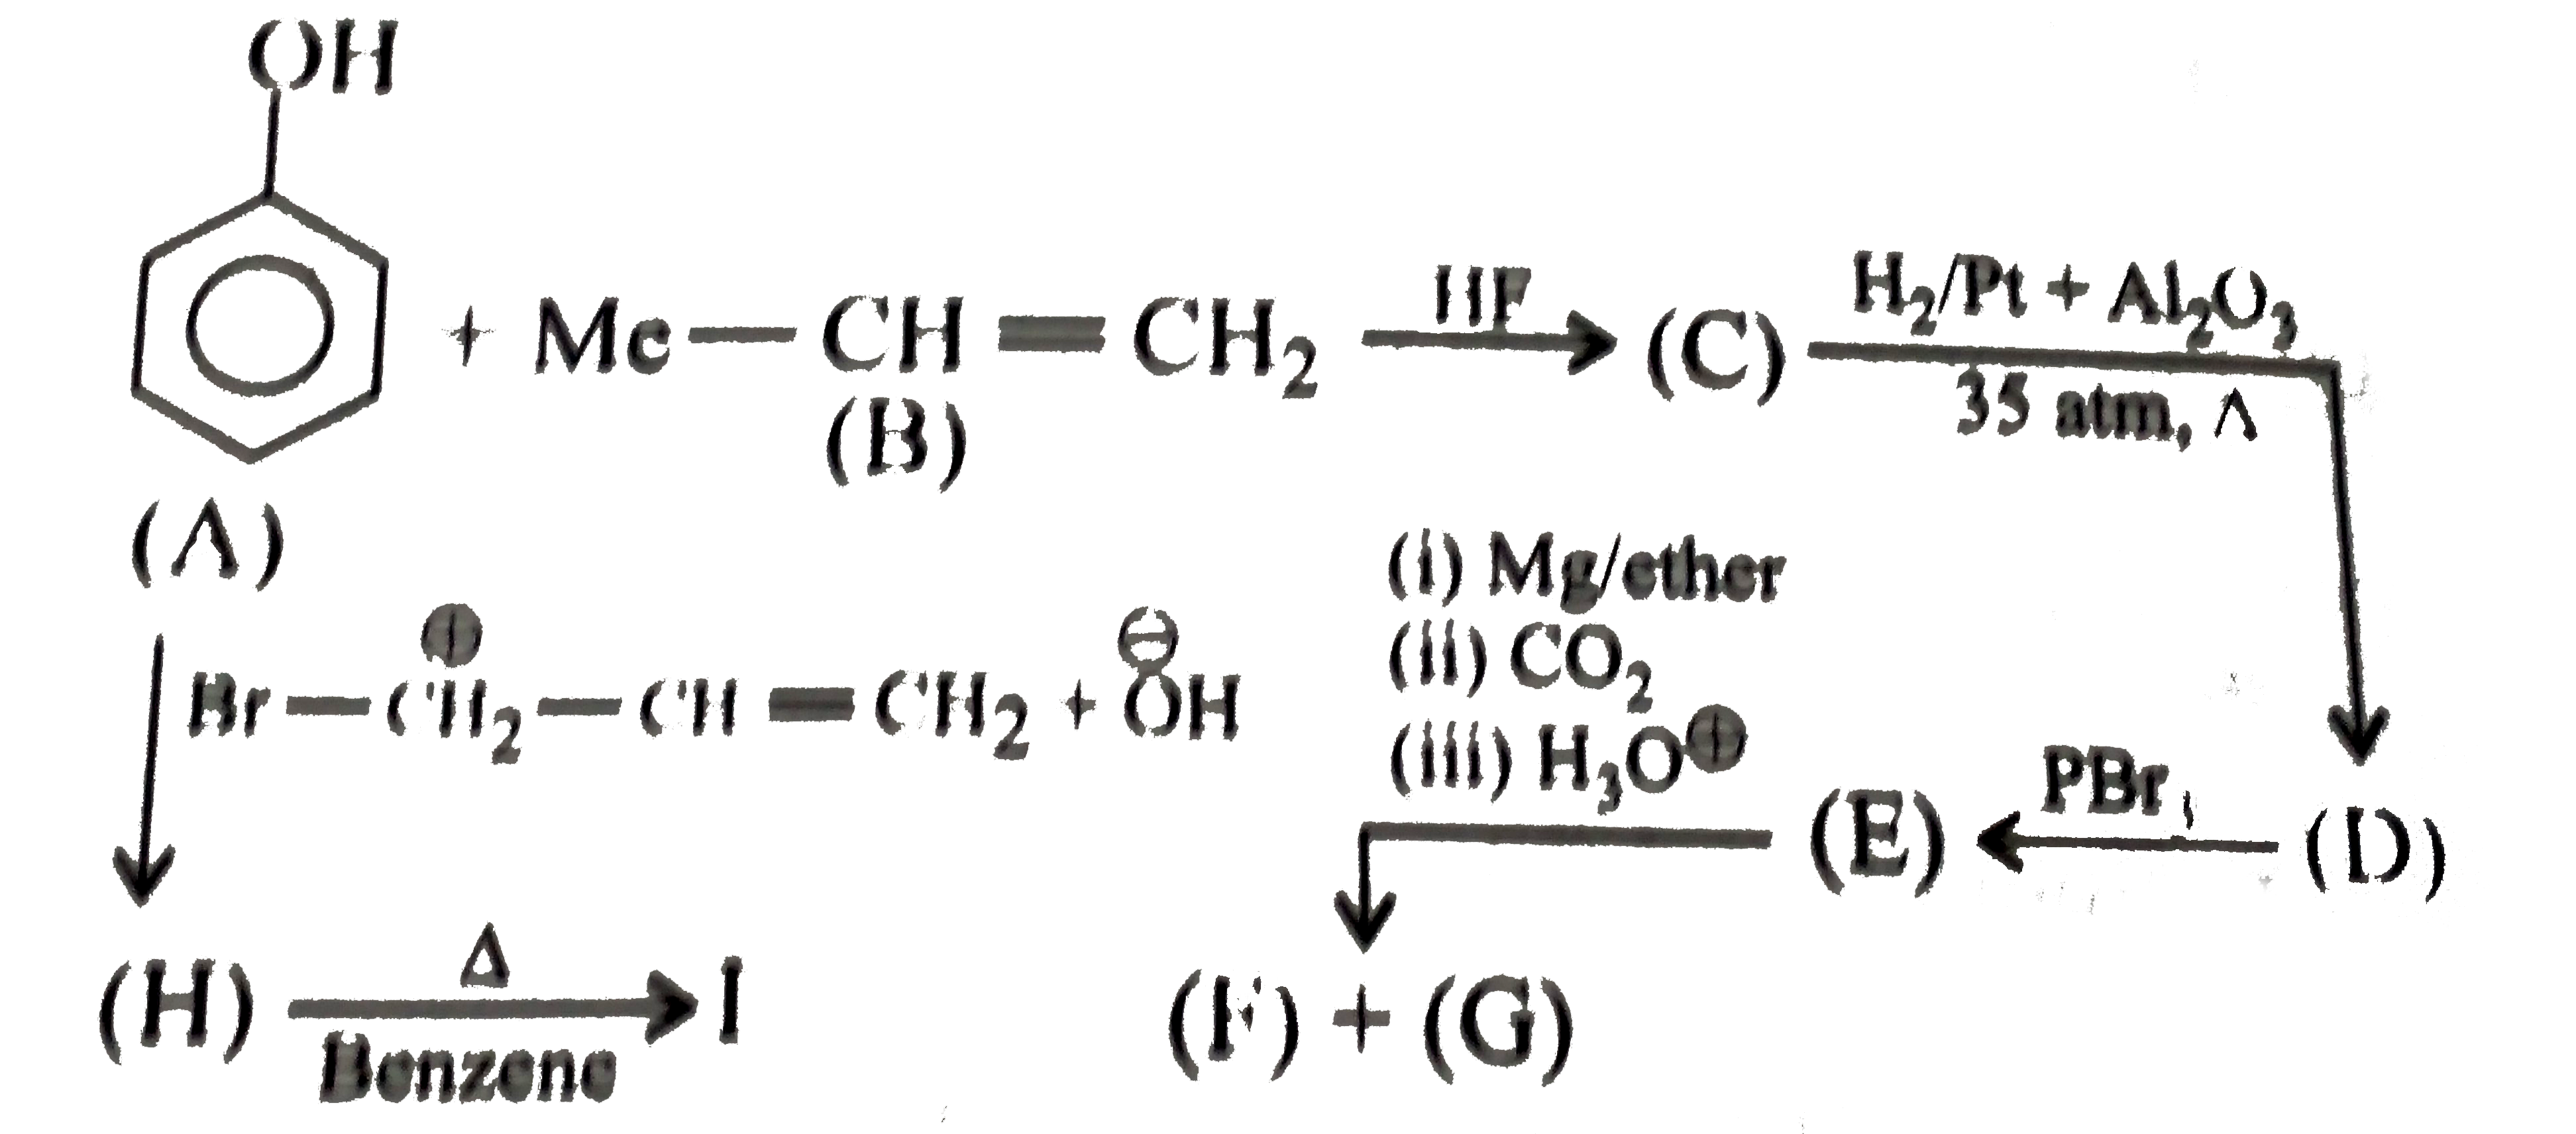 The reaction and mechanism involved in the formation of compound (H) form (A), respectively, are: